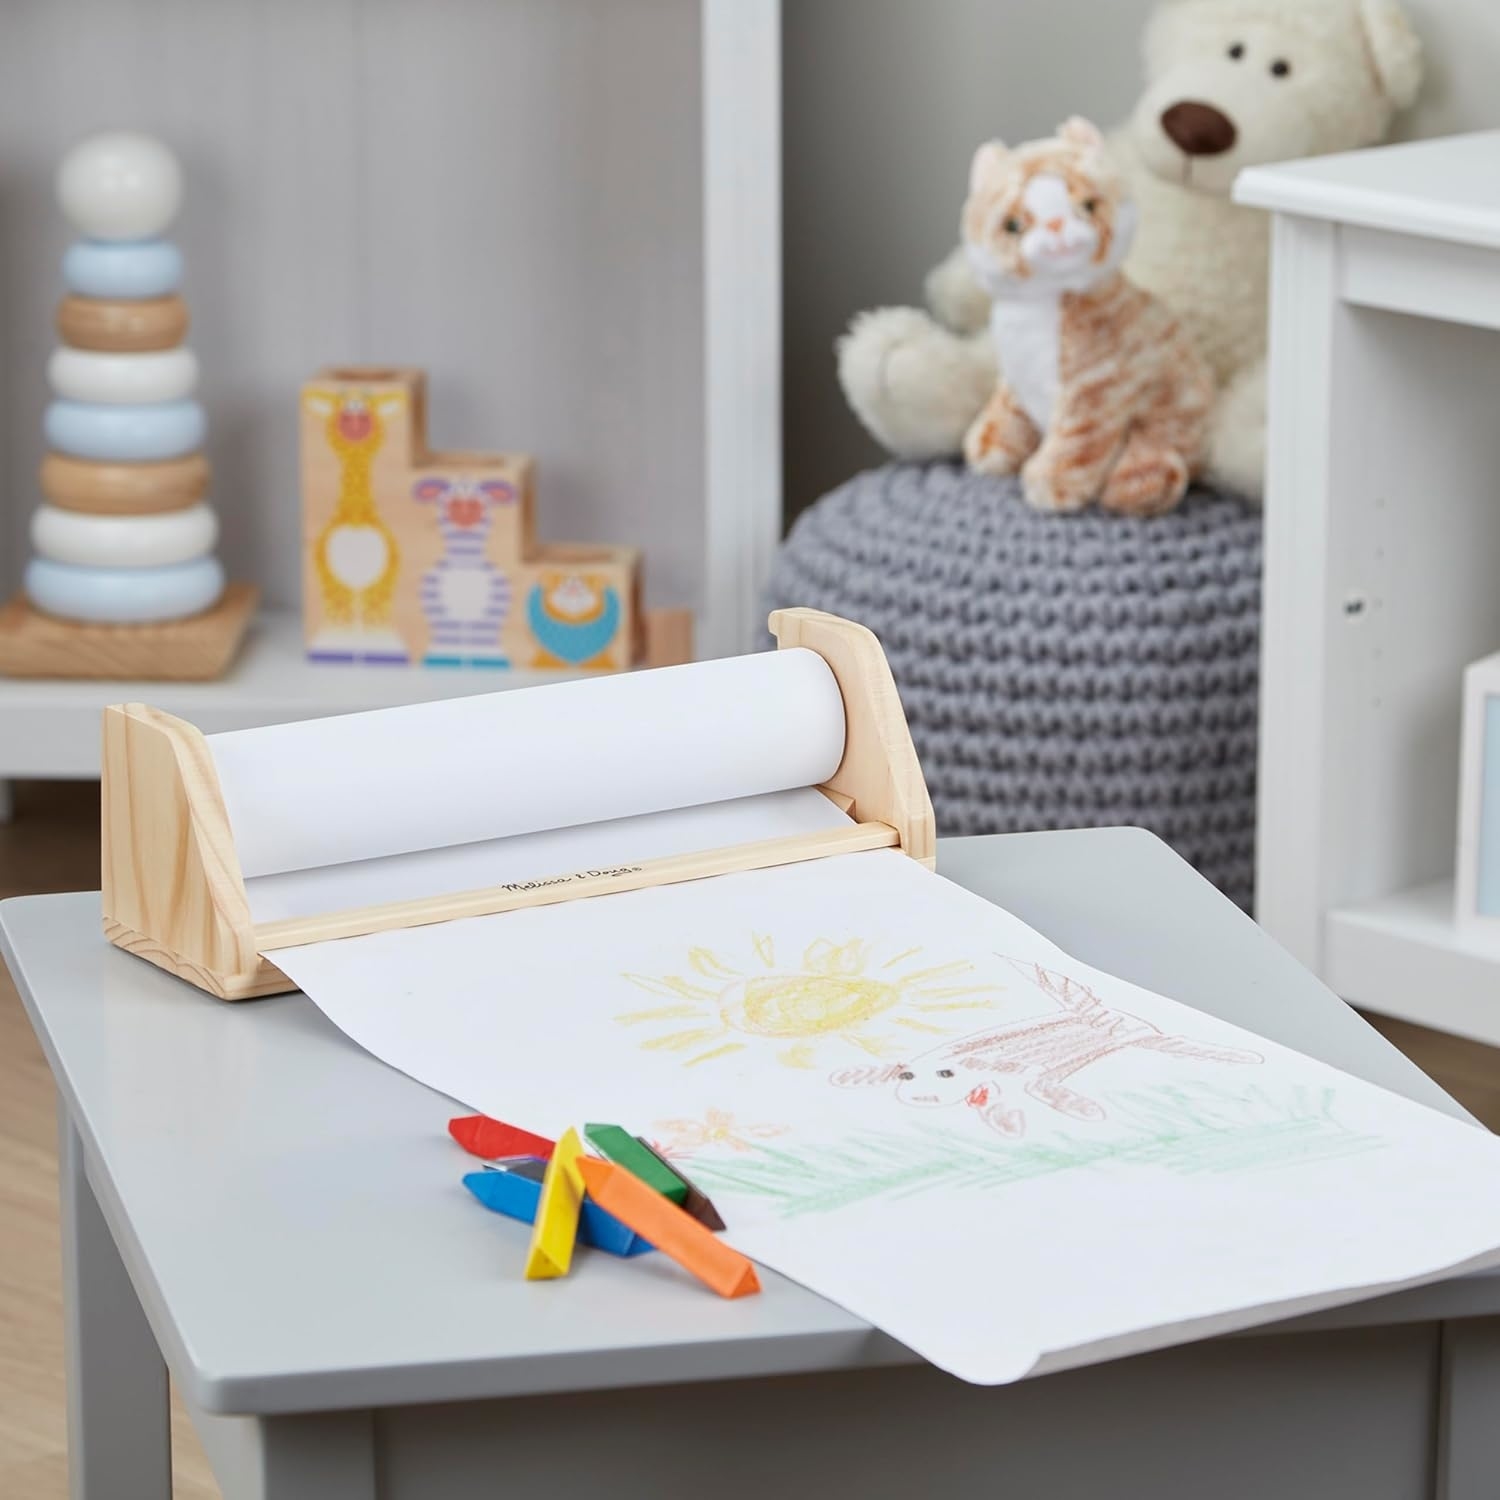 Children&#x27;s drawing table with paper roll, crayons, and toys in the background